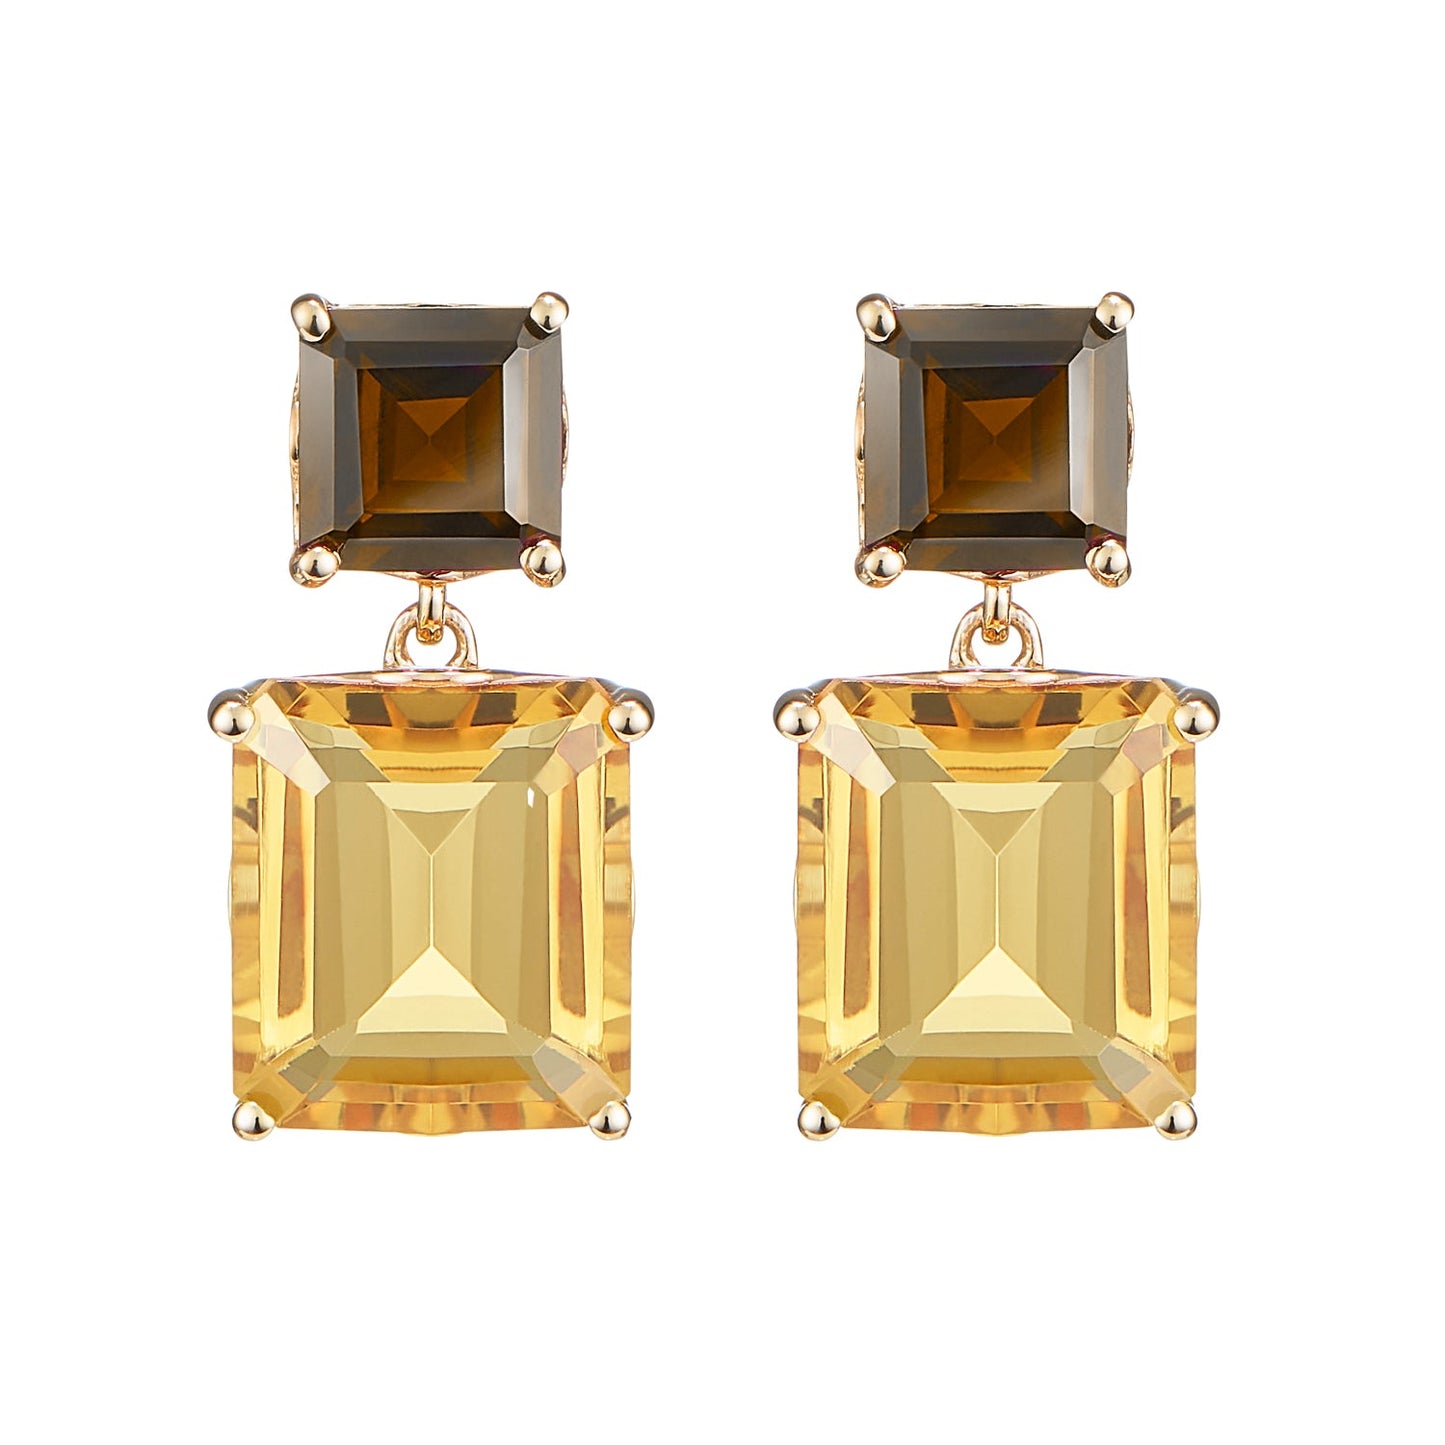 London-made luxury custom gold gemstone jewellery -9ct Yellow Gold Octagon Gold Drop Earrings in Smoky Quartz and Citrine – Andalusian Collection, Augustine Jewellery, British Jewellers, Gemstone Jewellery, Luxury Jewellery London.